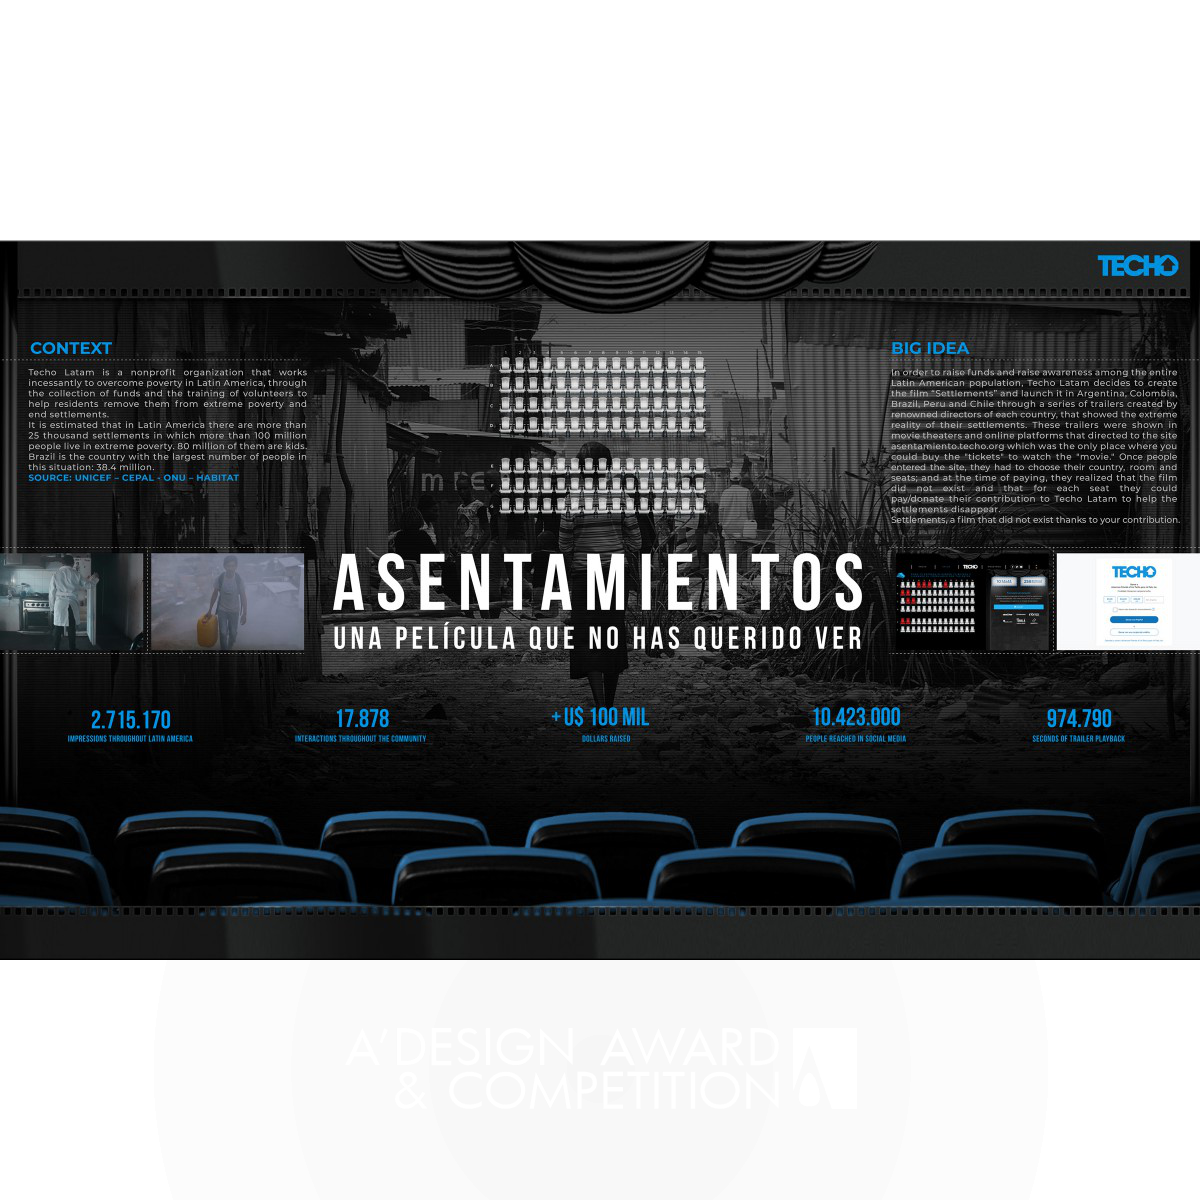 Pancho González wins Bronze at the prestigious A' Advertising, Marketing and Communication Design Award with Settlements Integrated Campaign.